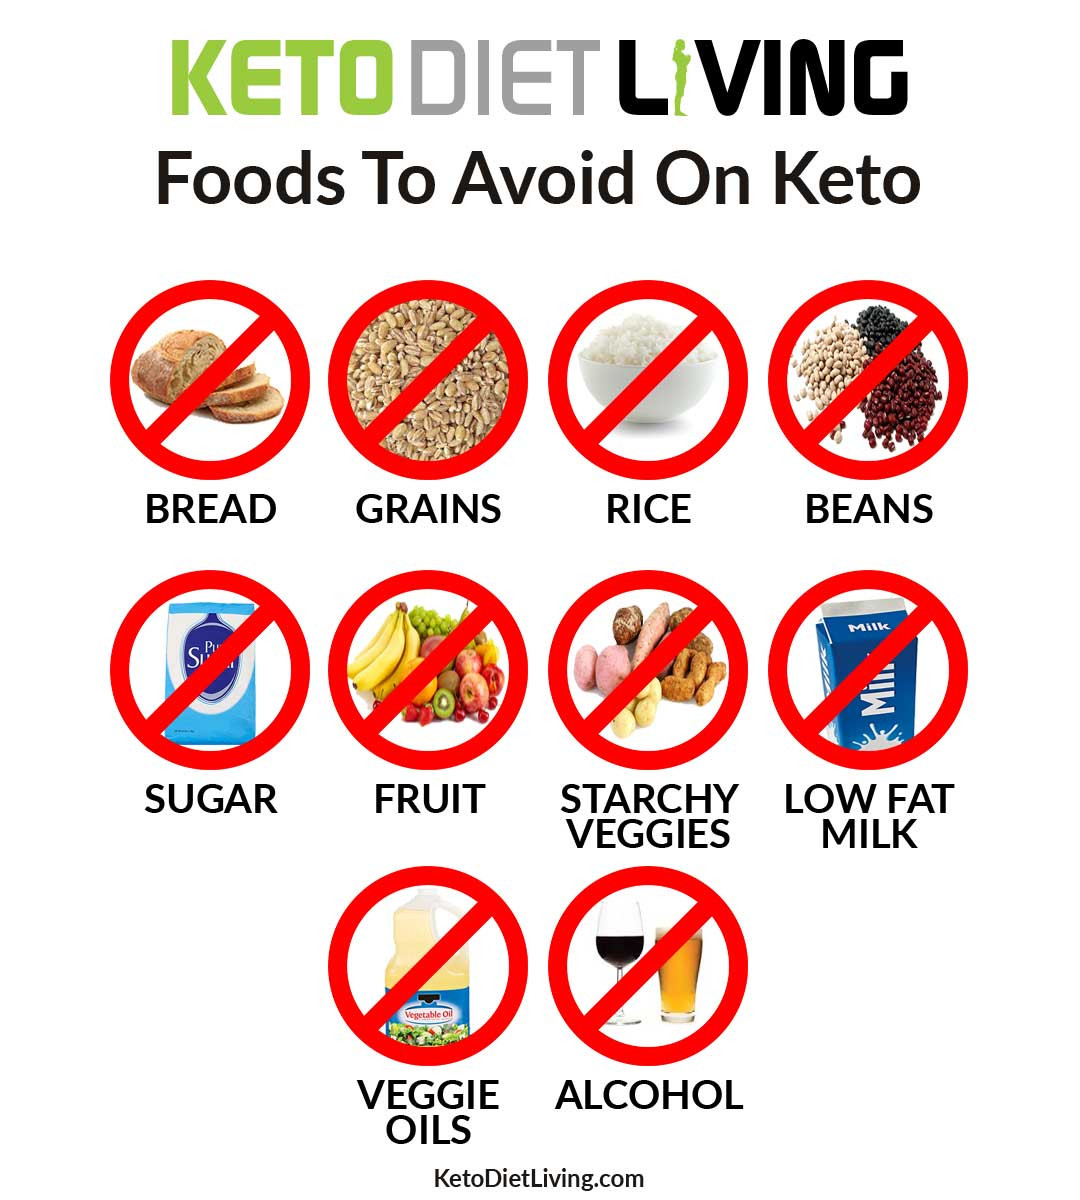 Foods To Avoid On Keto Diet
 How Many Carbs Should You Eat Each Day to Get Into Ketosis